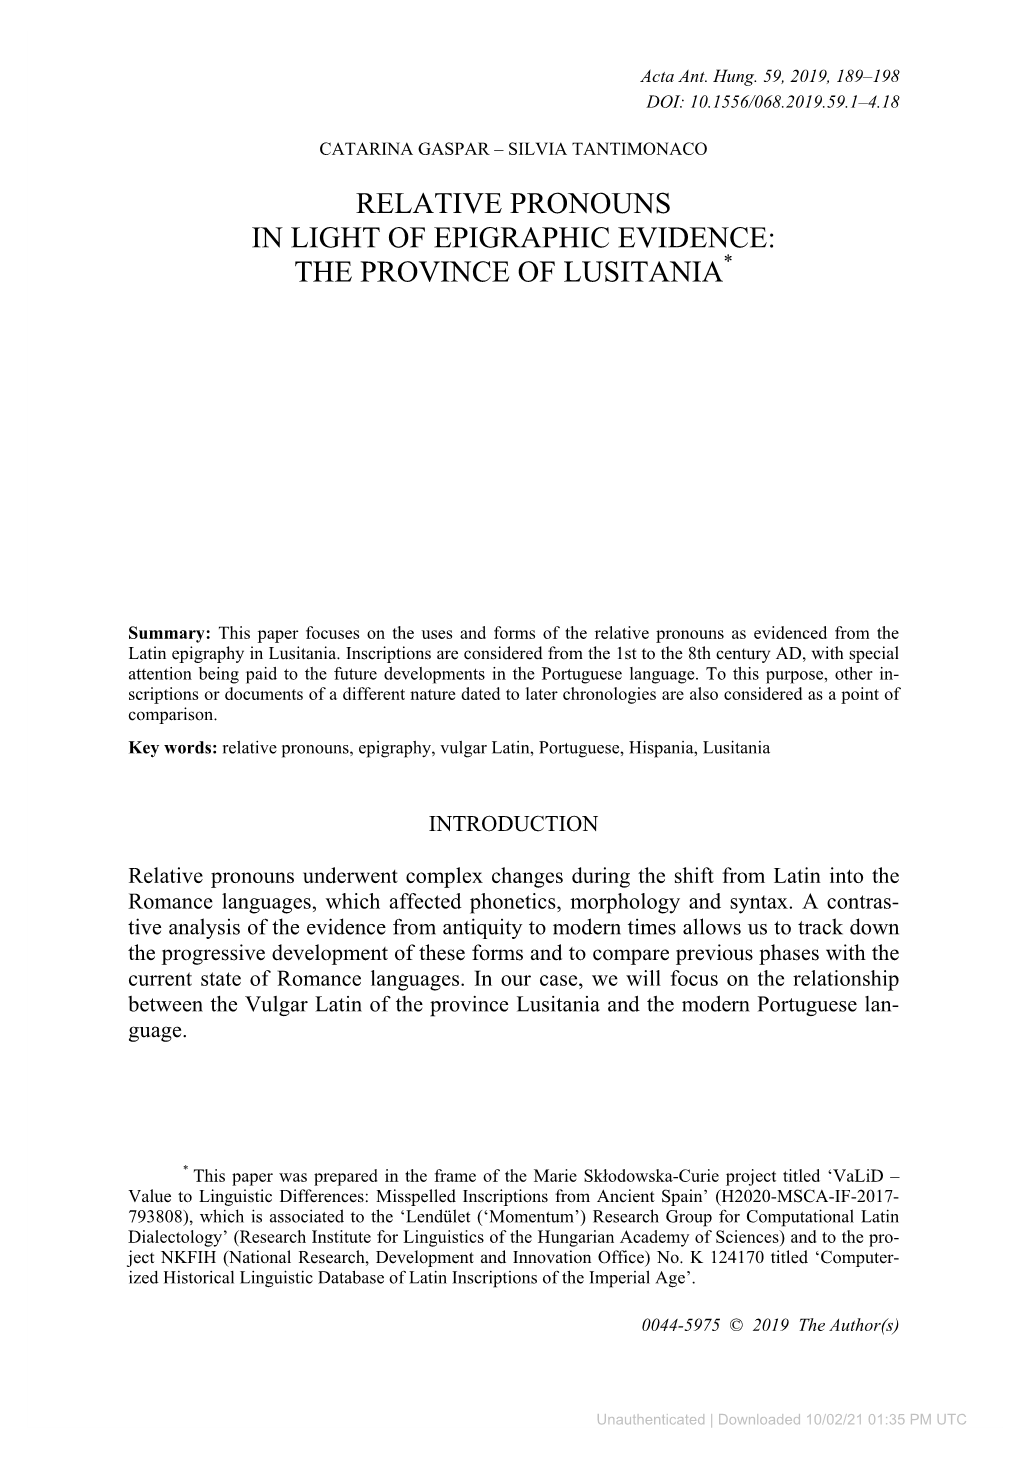 Relative Pronouns in Light of Epigraphic Evidence: the Province of Lusitania*